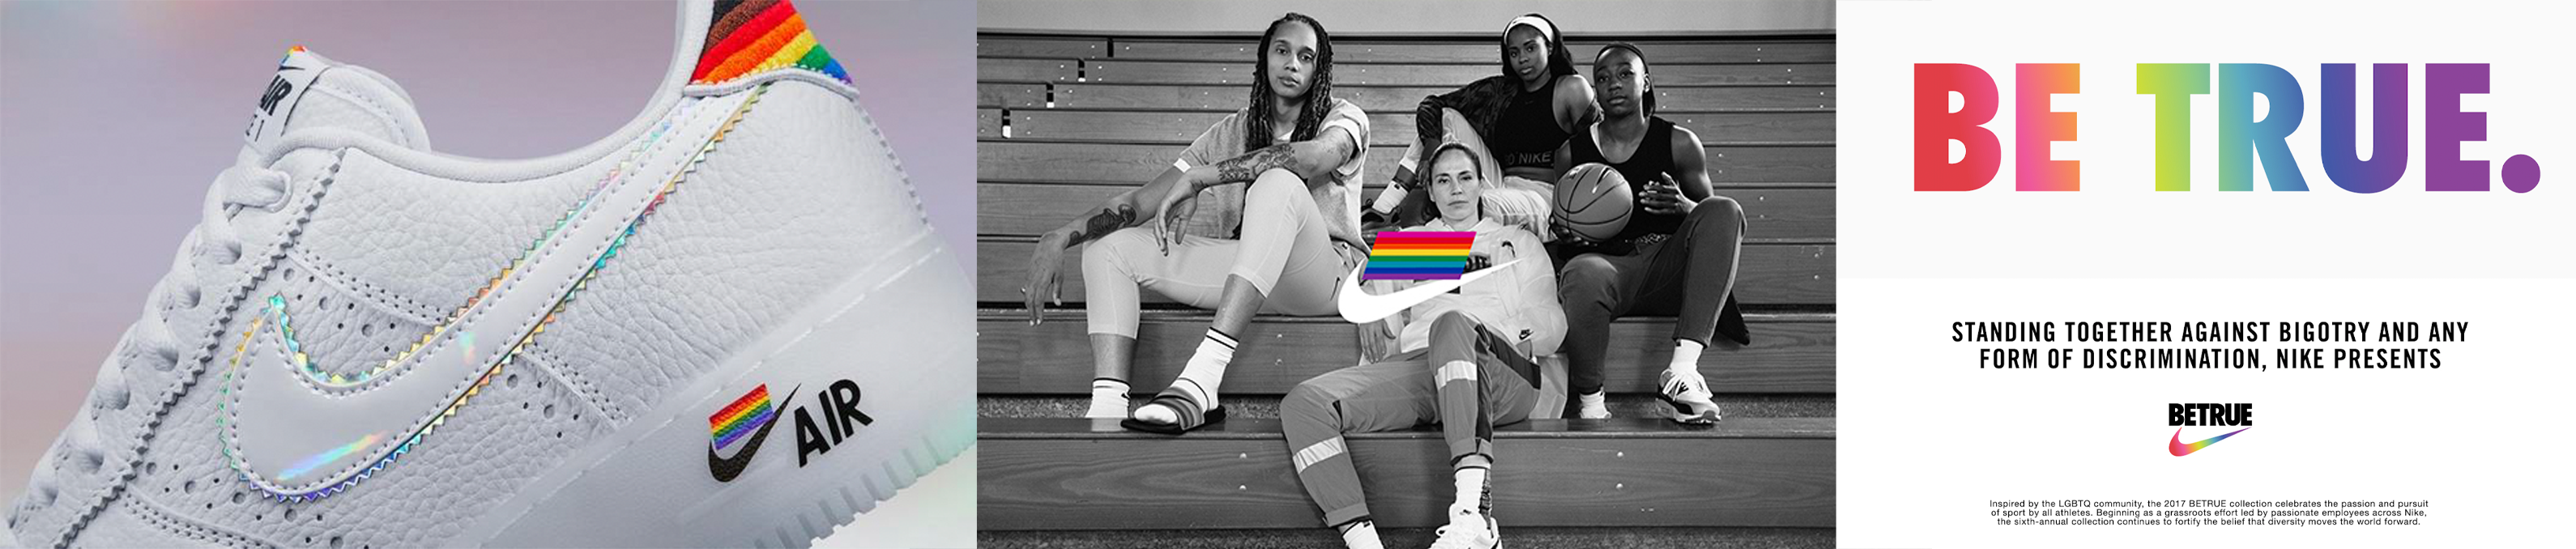 nike campaign collage betrue 2020 pride collection